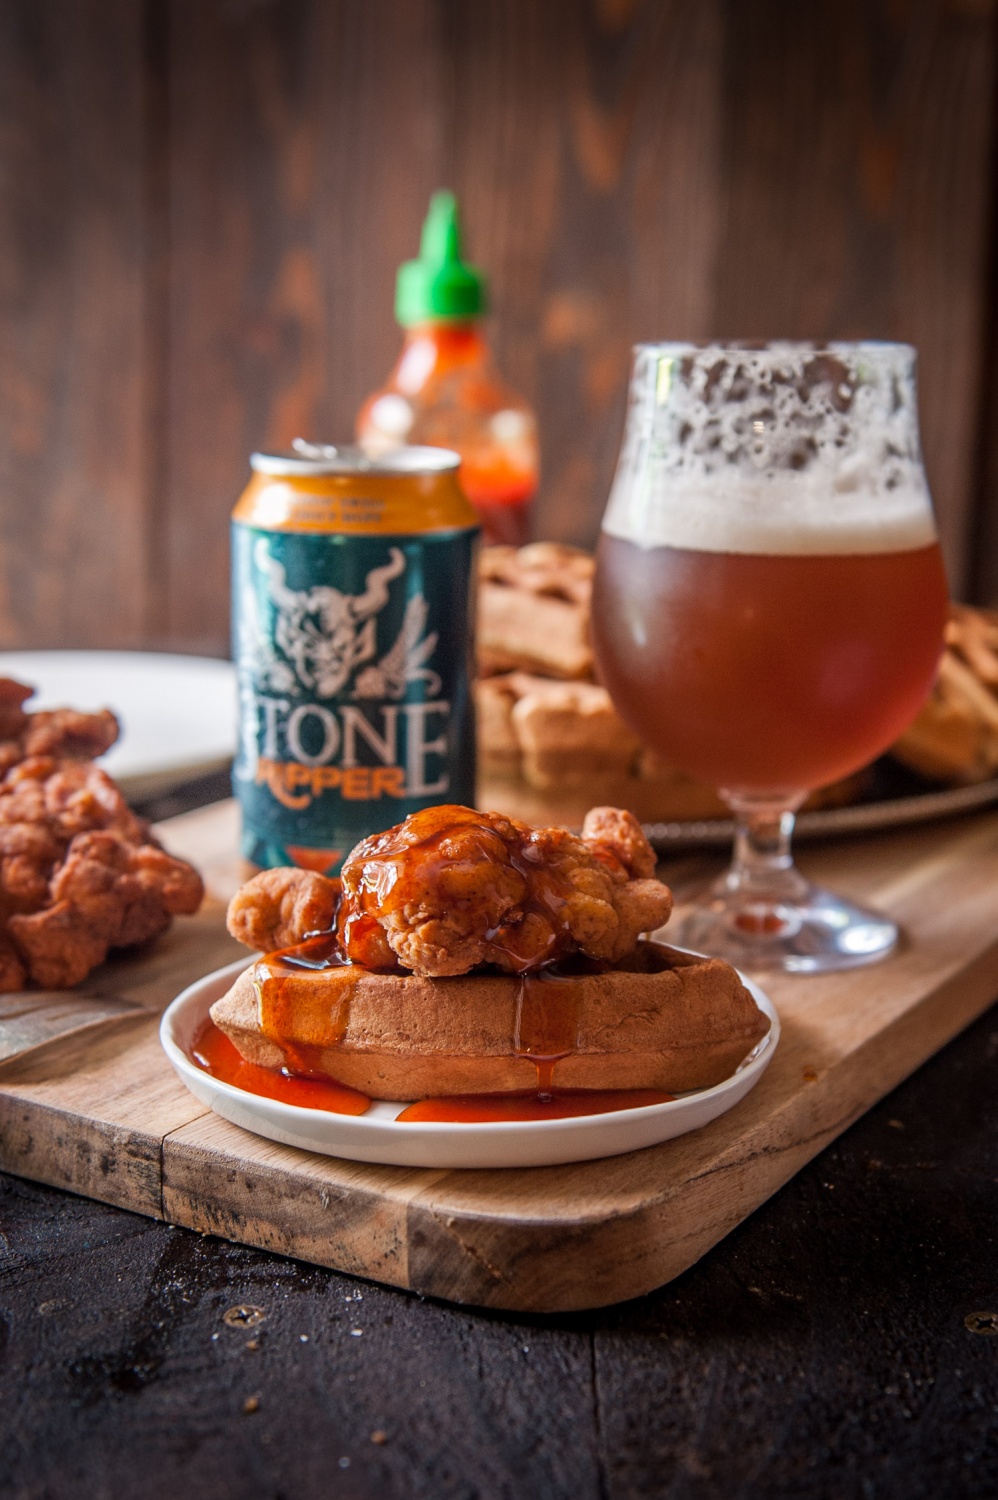 Stone Ripper Fried Chicken & Beer Waffles